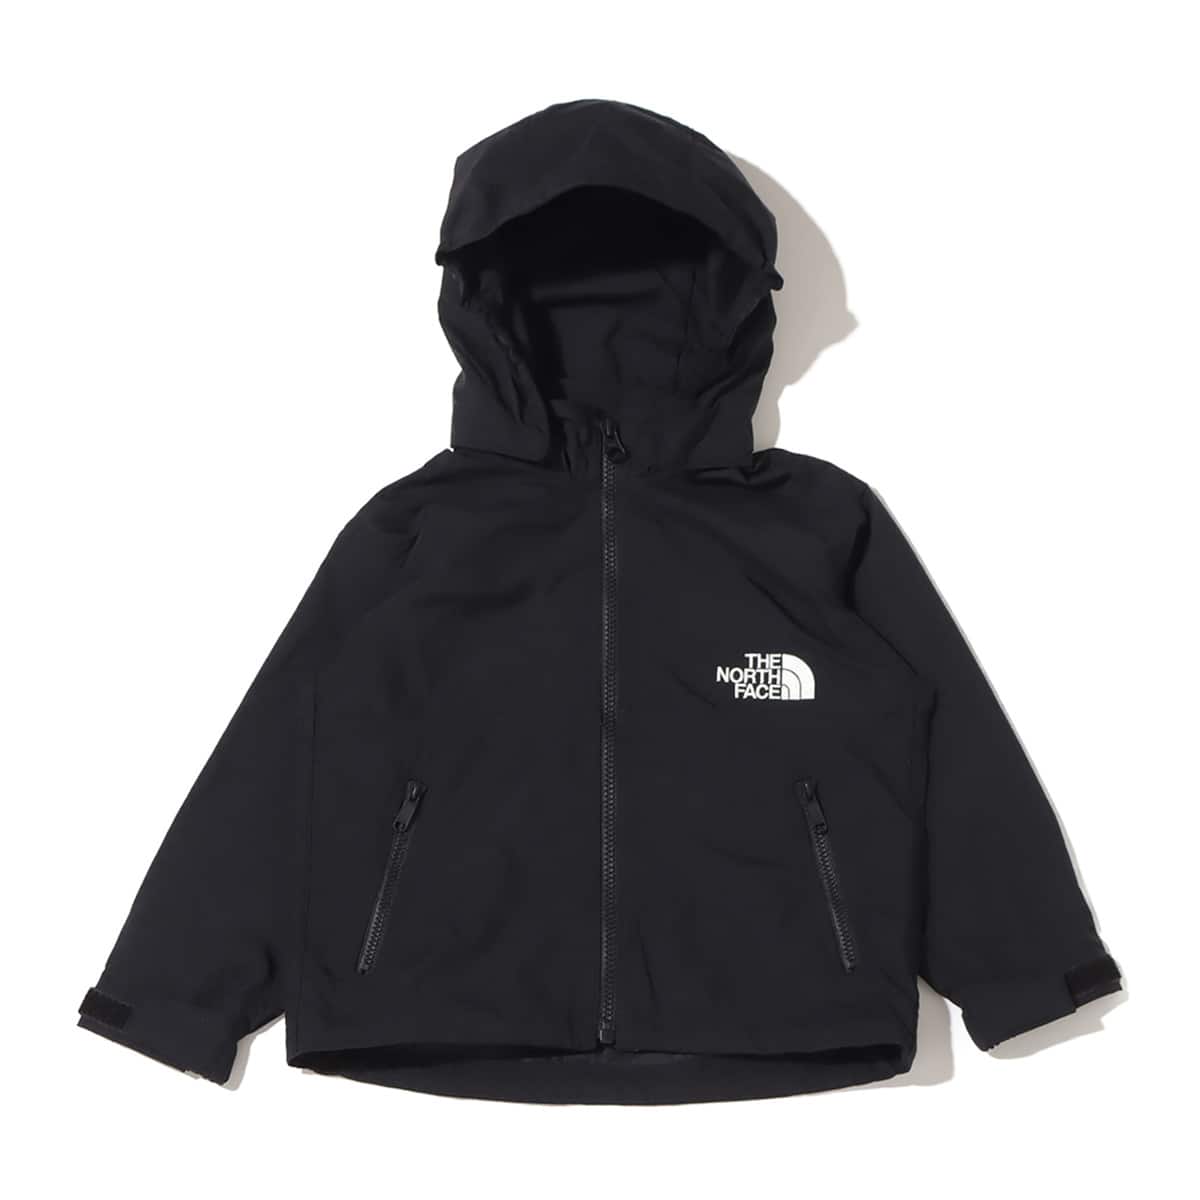 THE NORTH FACE BABY COMPACT JACKET BLACK 23FW-I